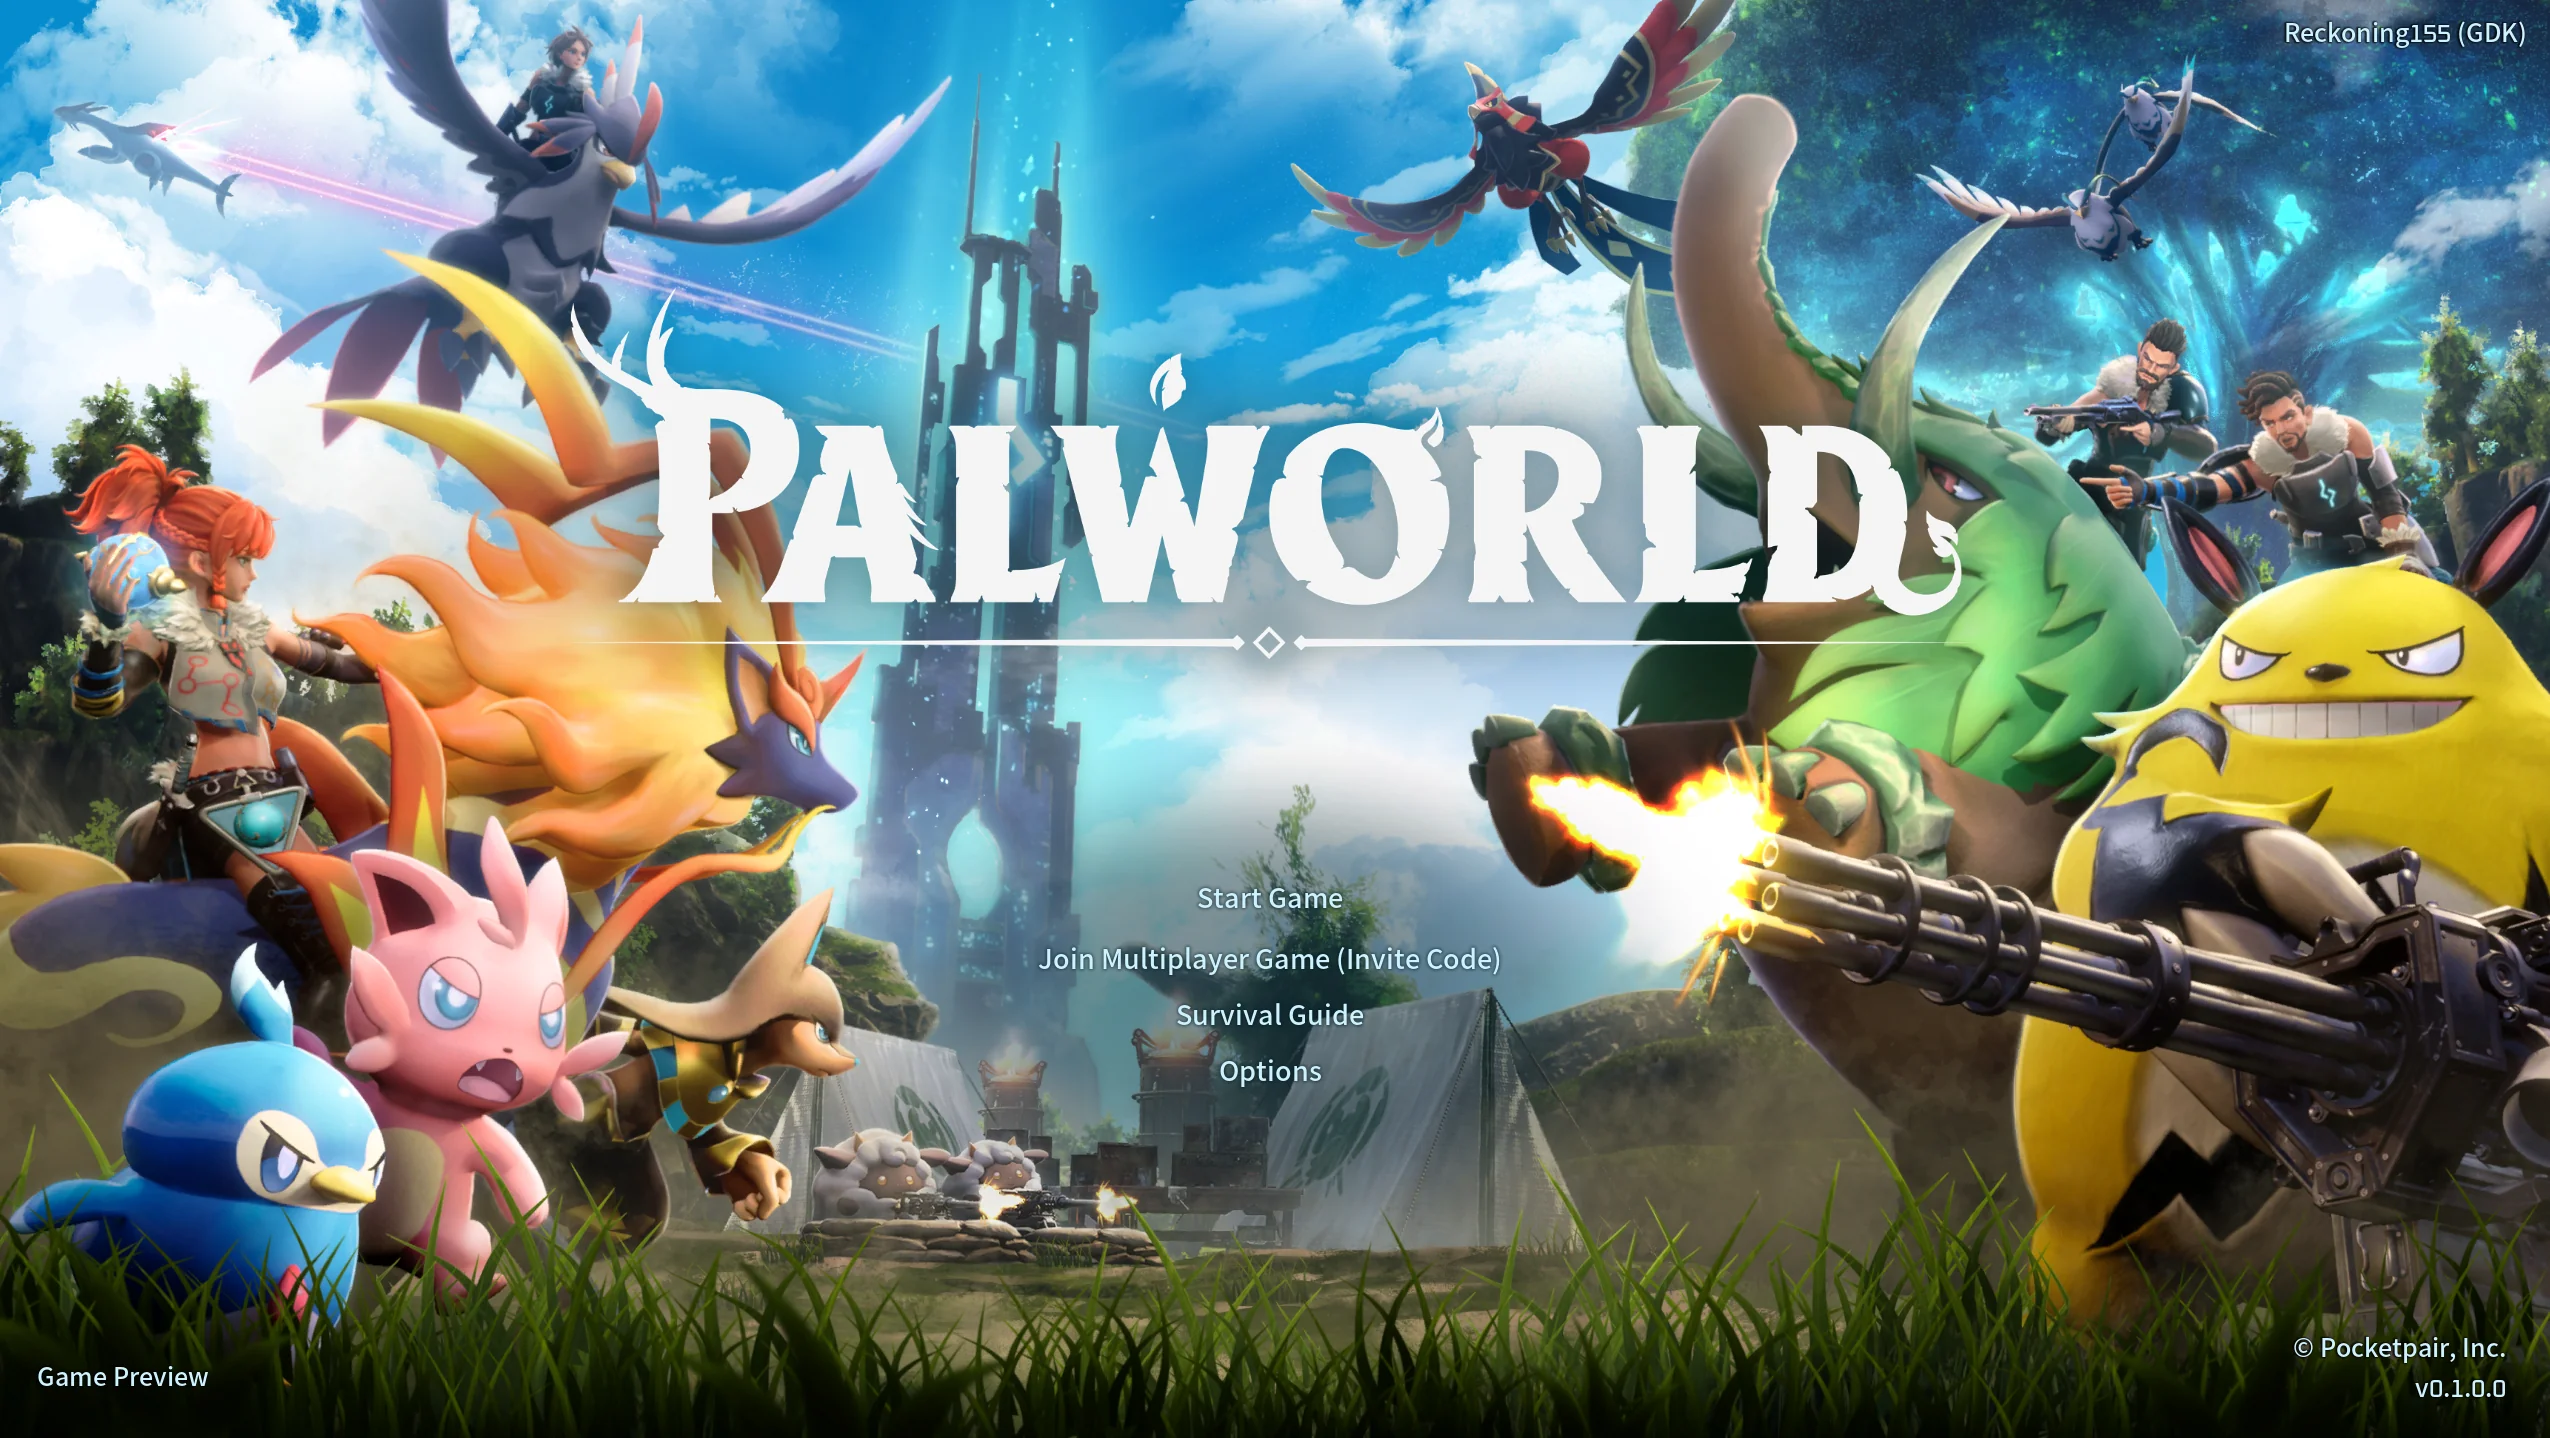 Peak online role-playing shooter Palworld on Steam reaches 561 000 users